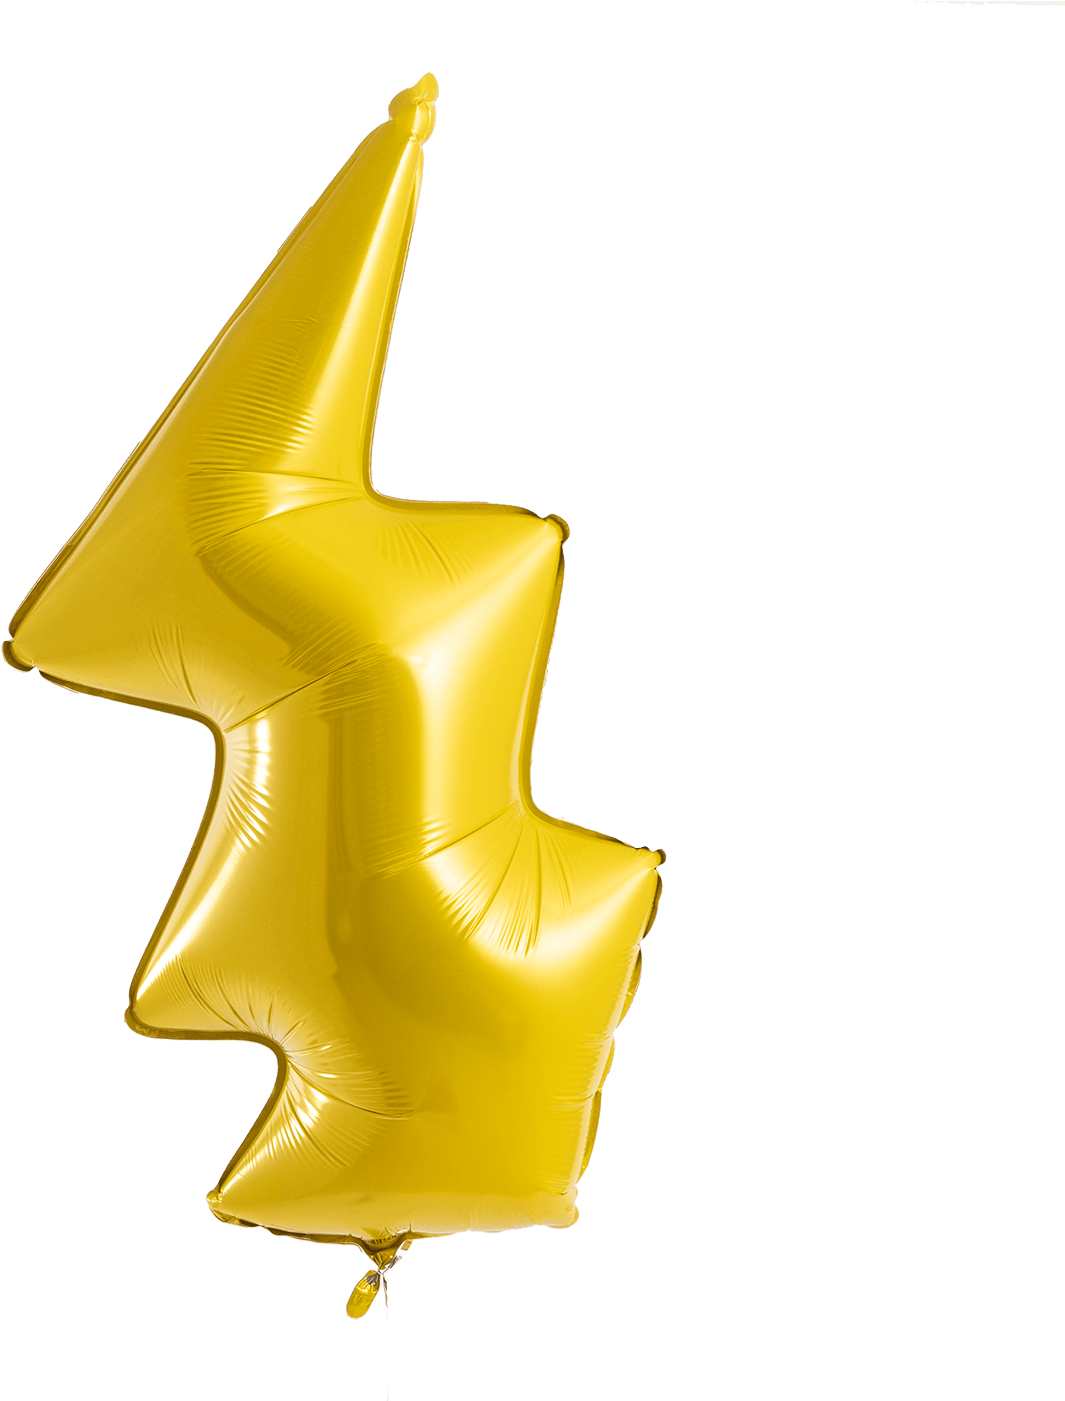 Golden Star Balloon Floating PNG image